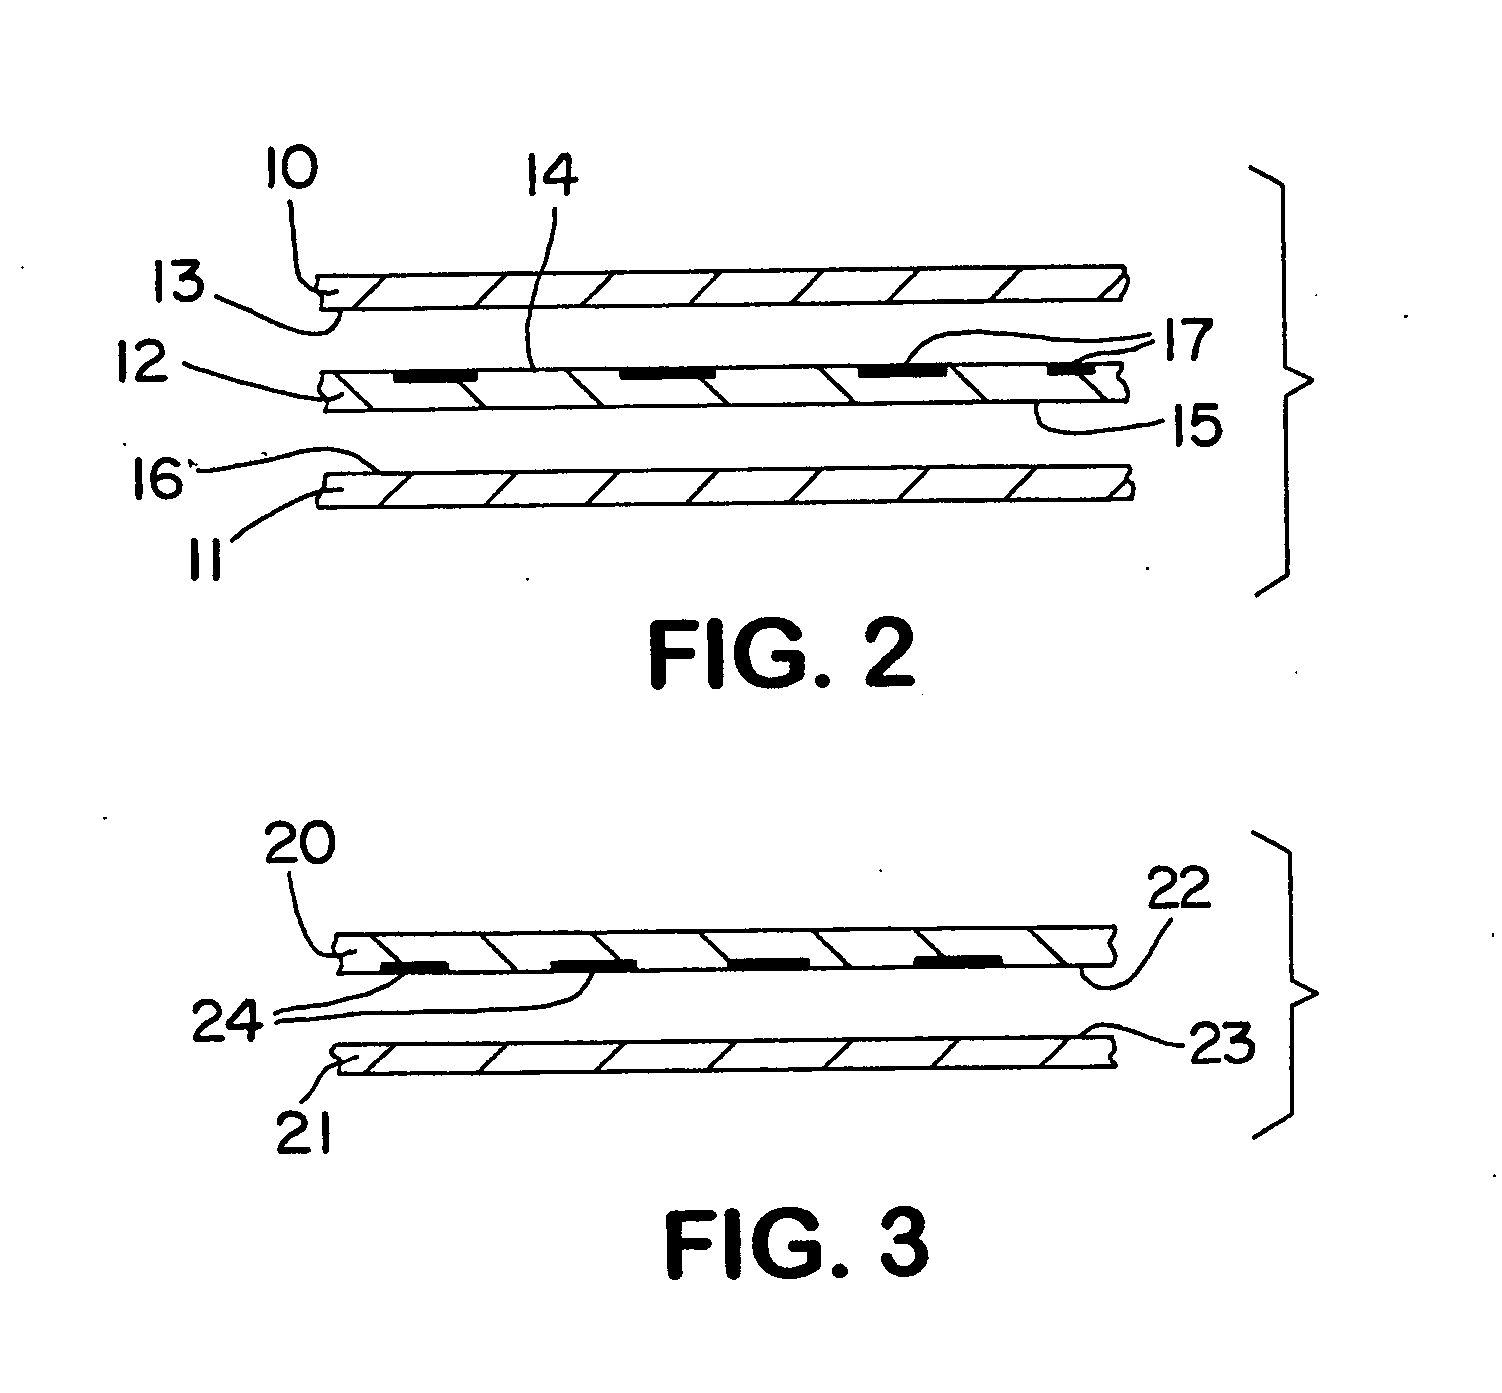 Nonwoven products having a patterned indicia